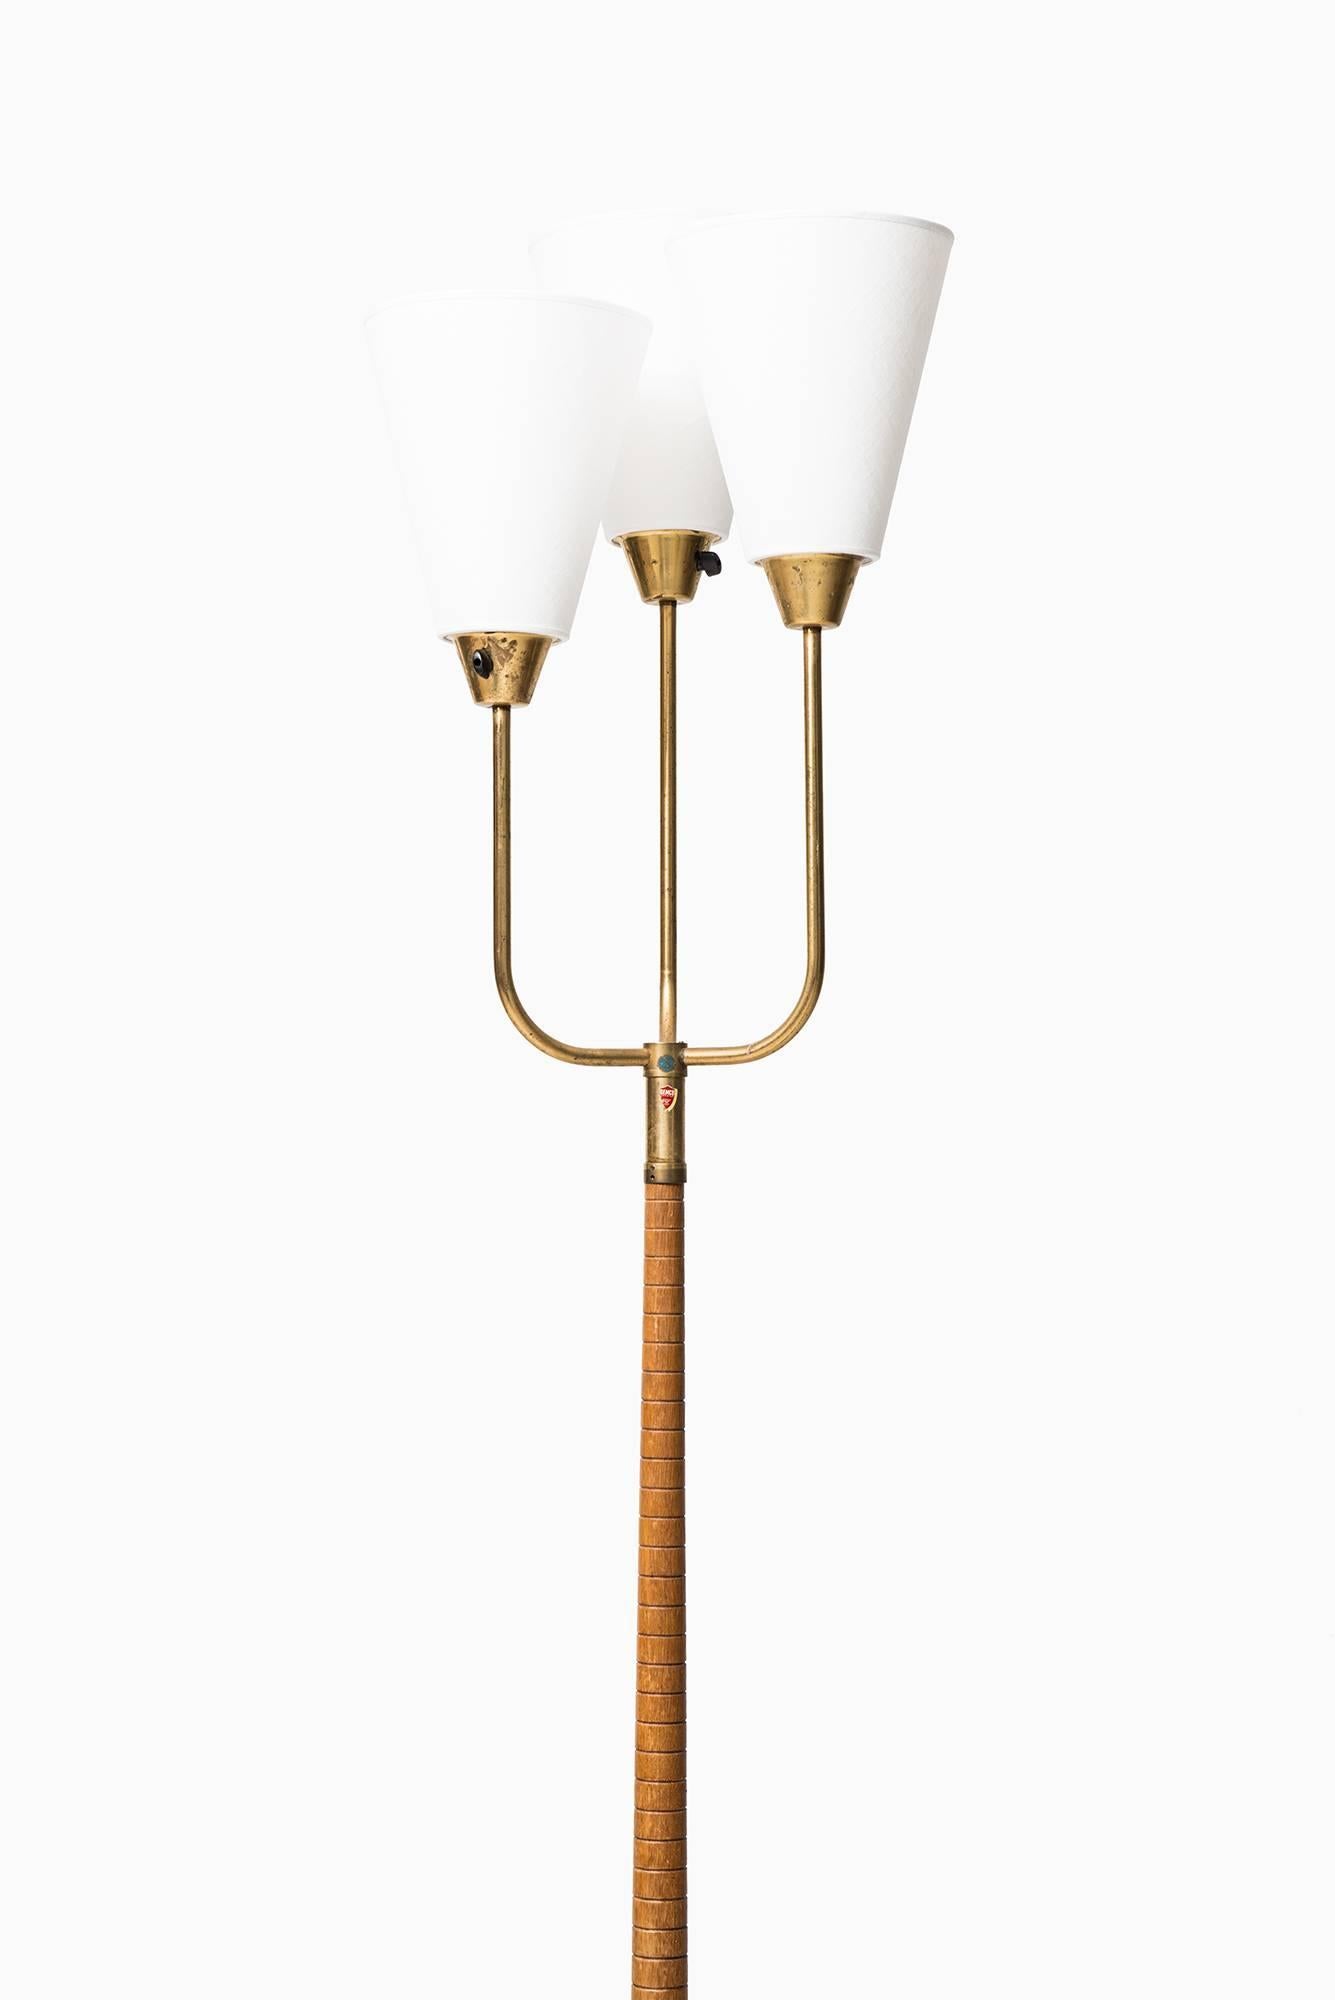 Midcentury uplight with three arms produced in Sweden.